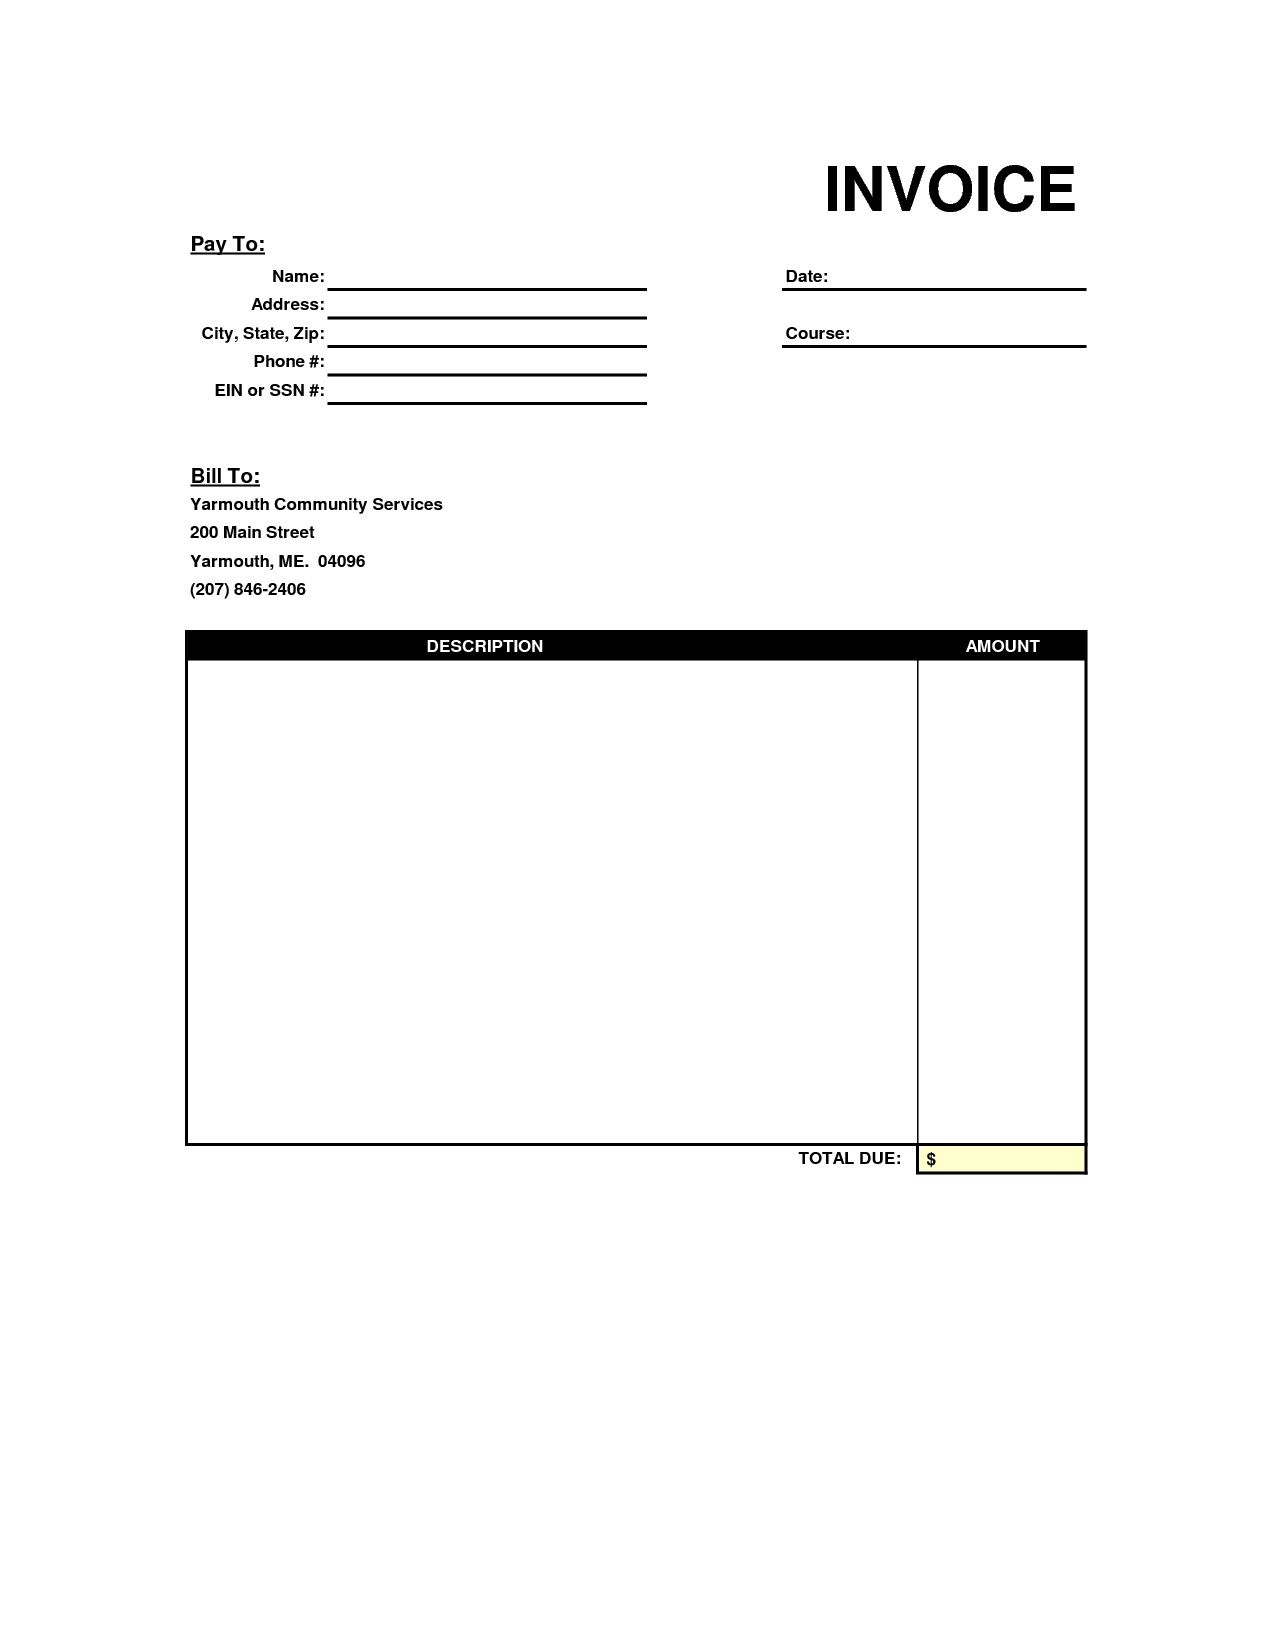 Blank Copy Of An Invoice Google Recruiter Resume Copy Of Blank - Invoice Forms Free Printable